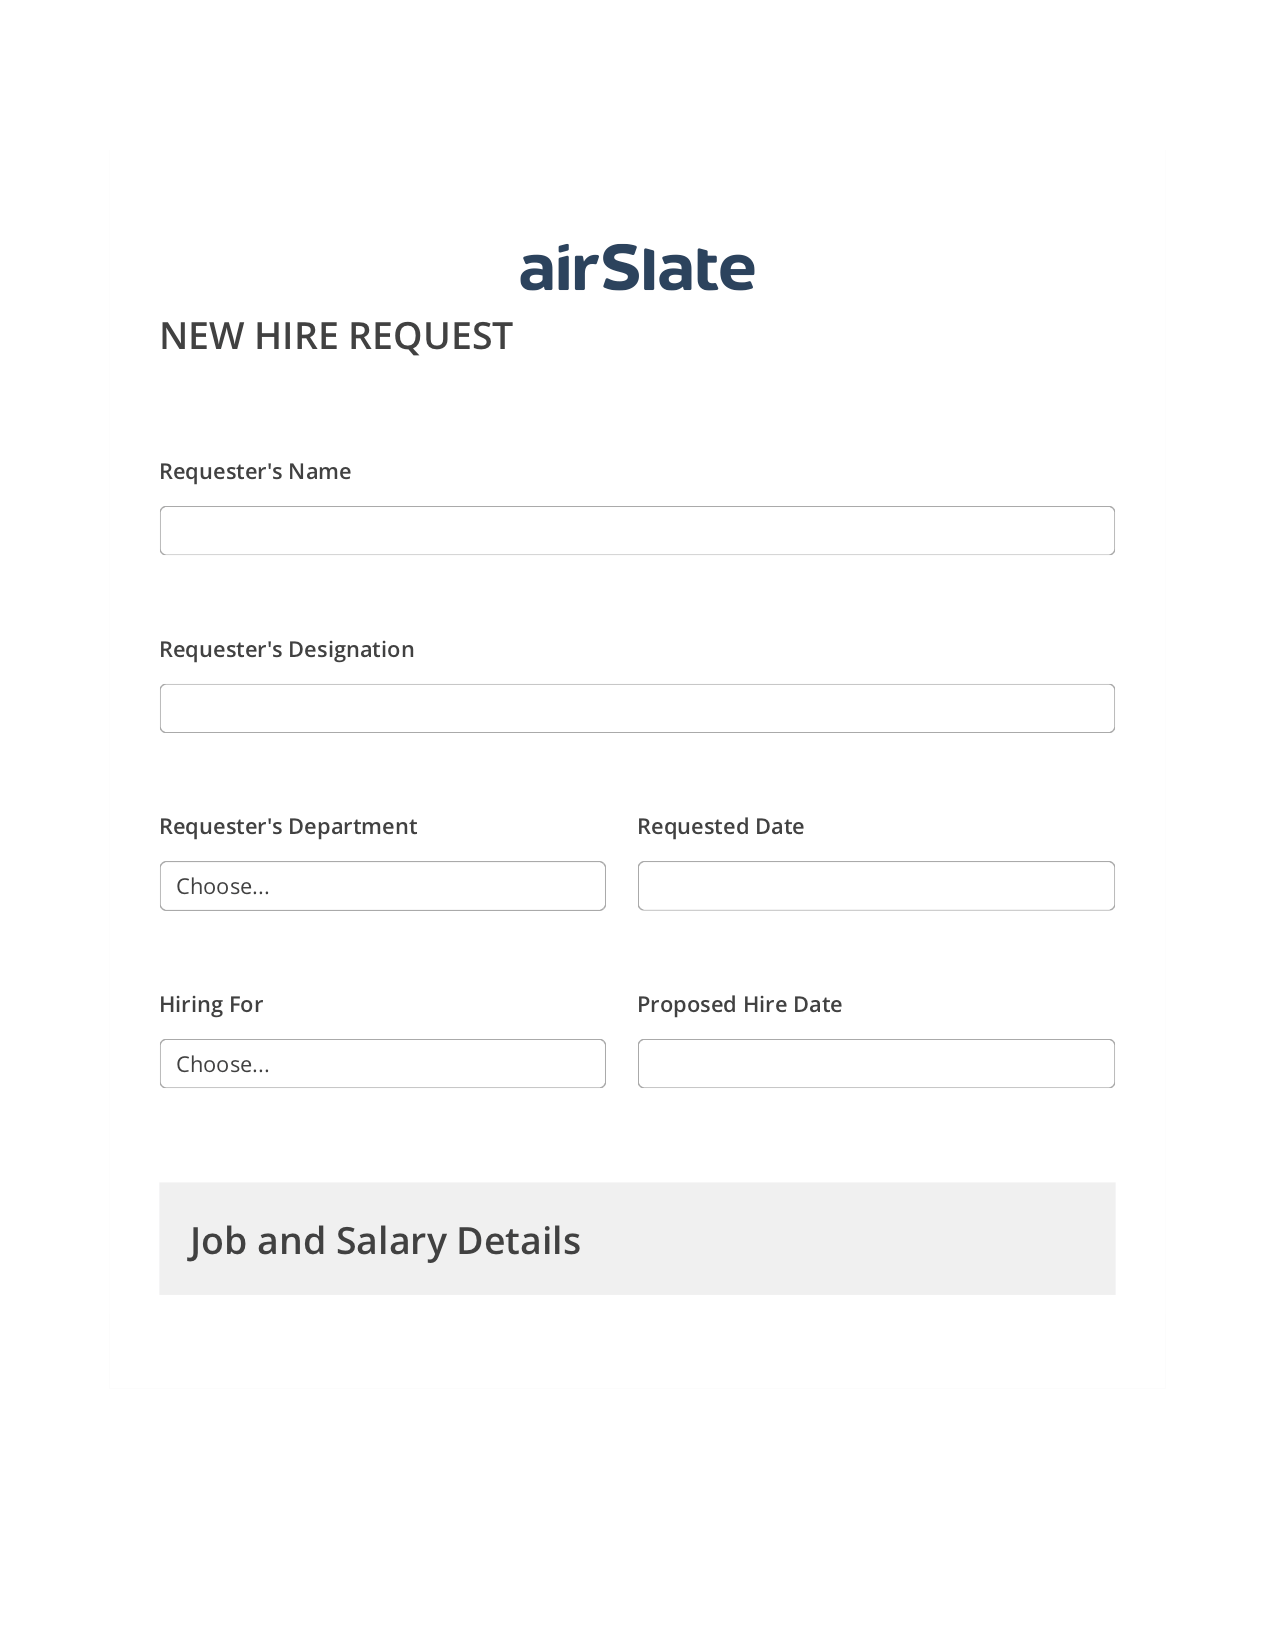 Multirole Hiring Request Workflow Prefill from NetSuite records, Send Mailchimp Campaign Bot, Export to Google Sheet Bot